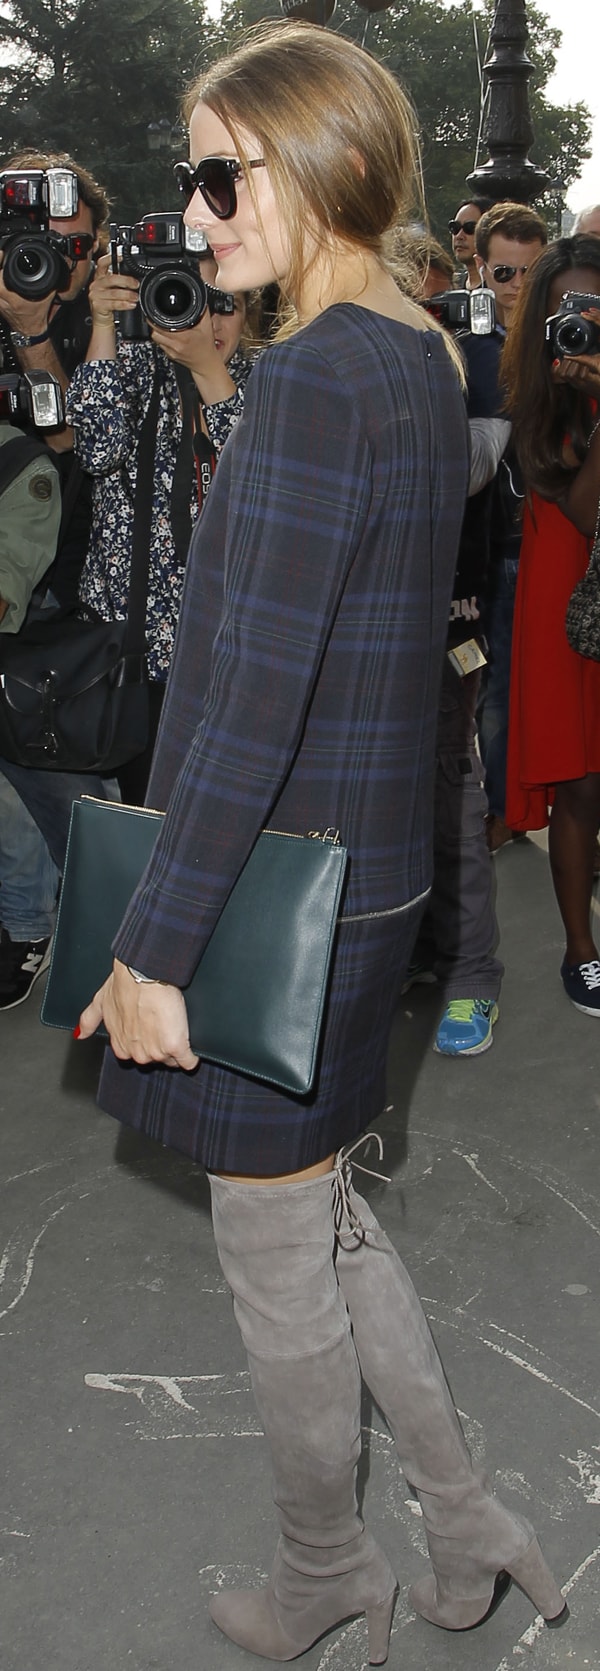 Olivia Palermo at the Carven show during the Paris Fashion Week RTW Spring/Summer 2014 in France